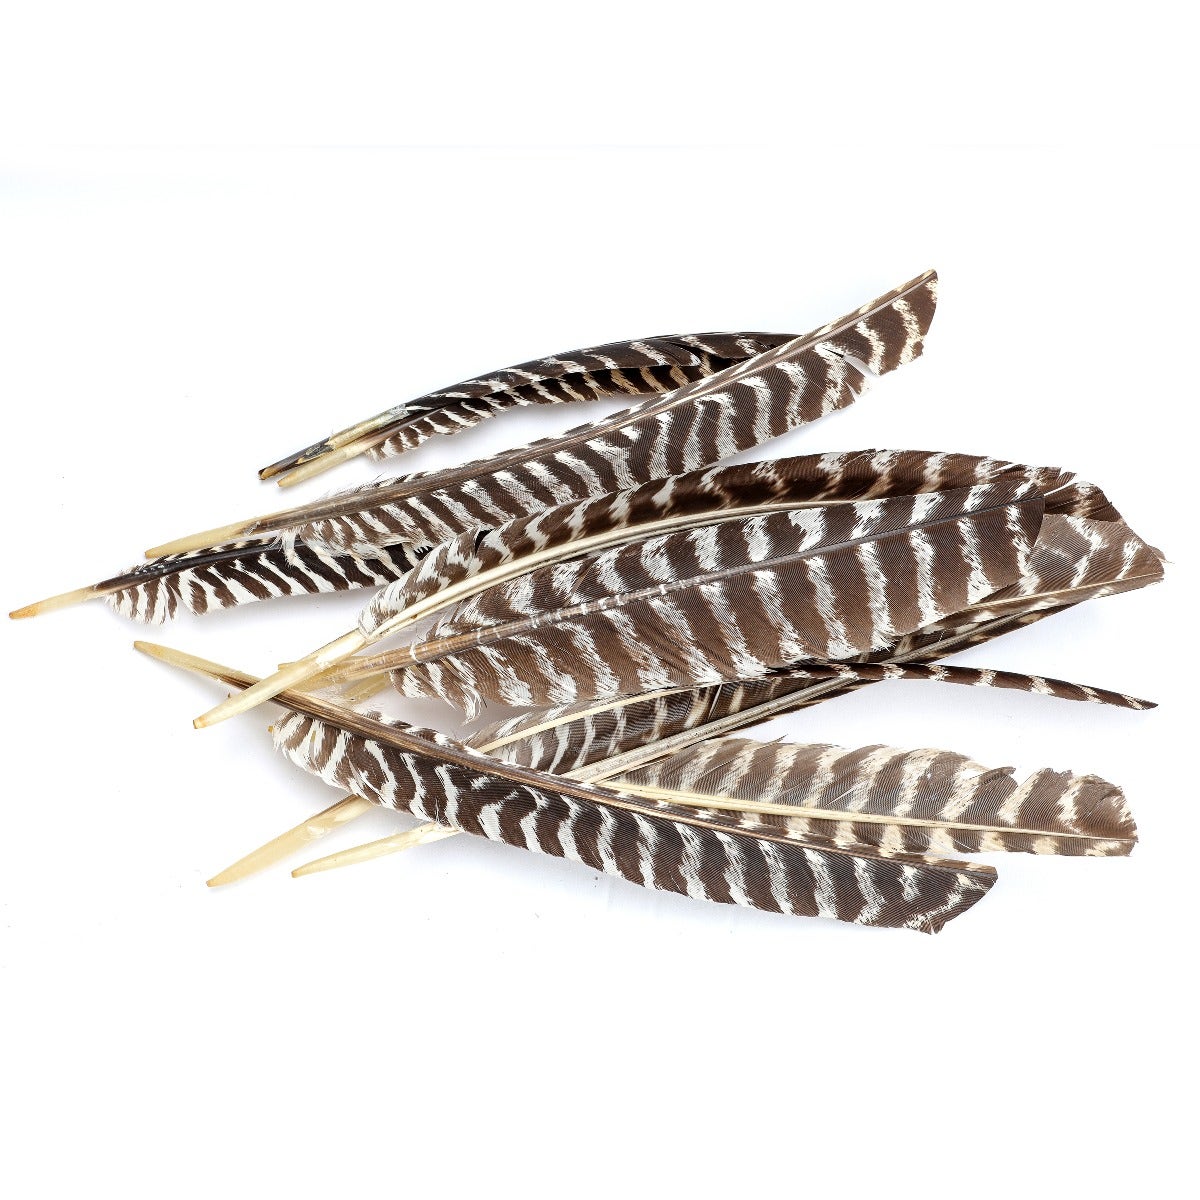 Barred Turkey Pointer Feathers - Left Wing - 12 pc - Natural